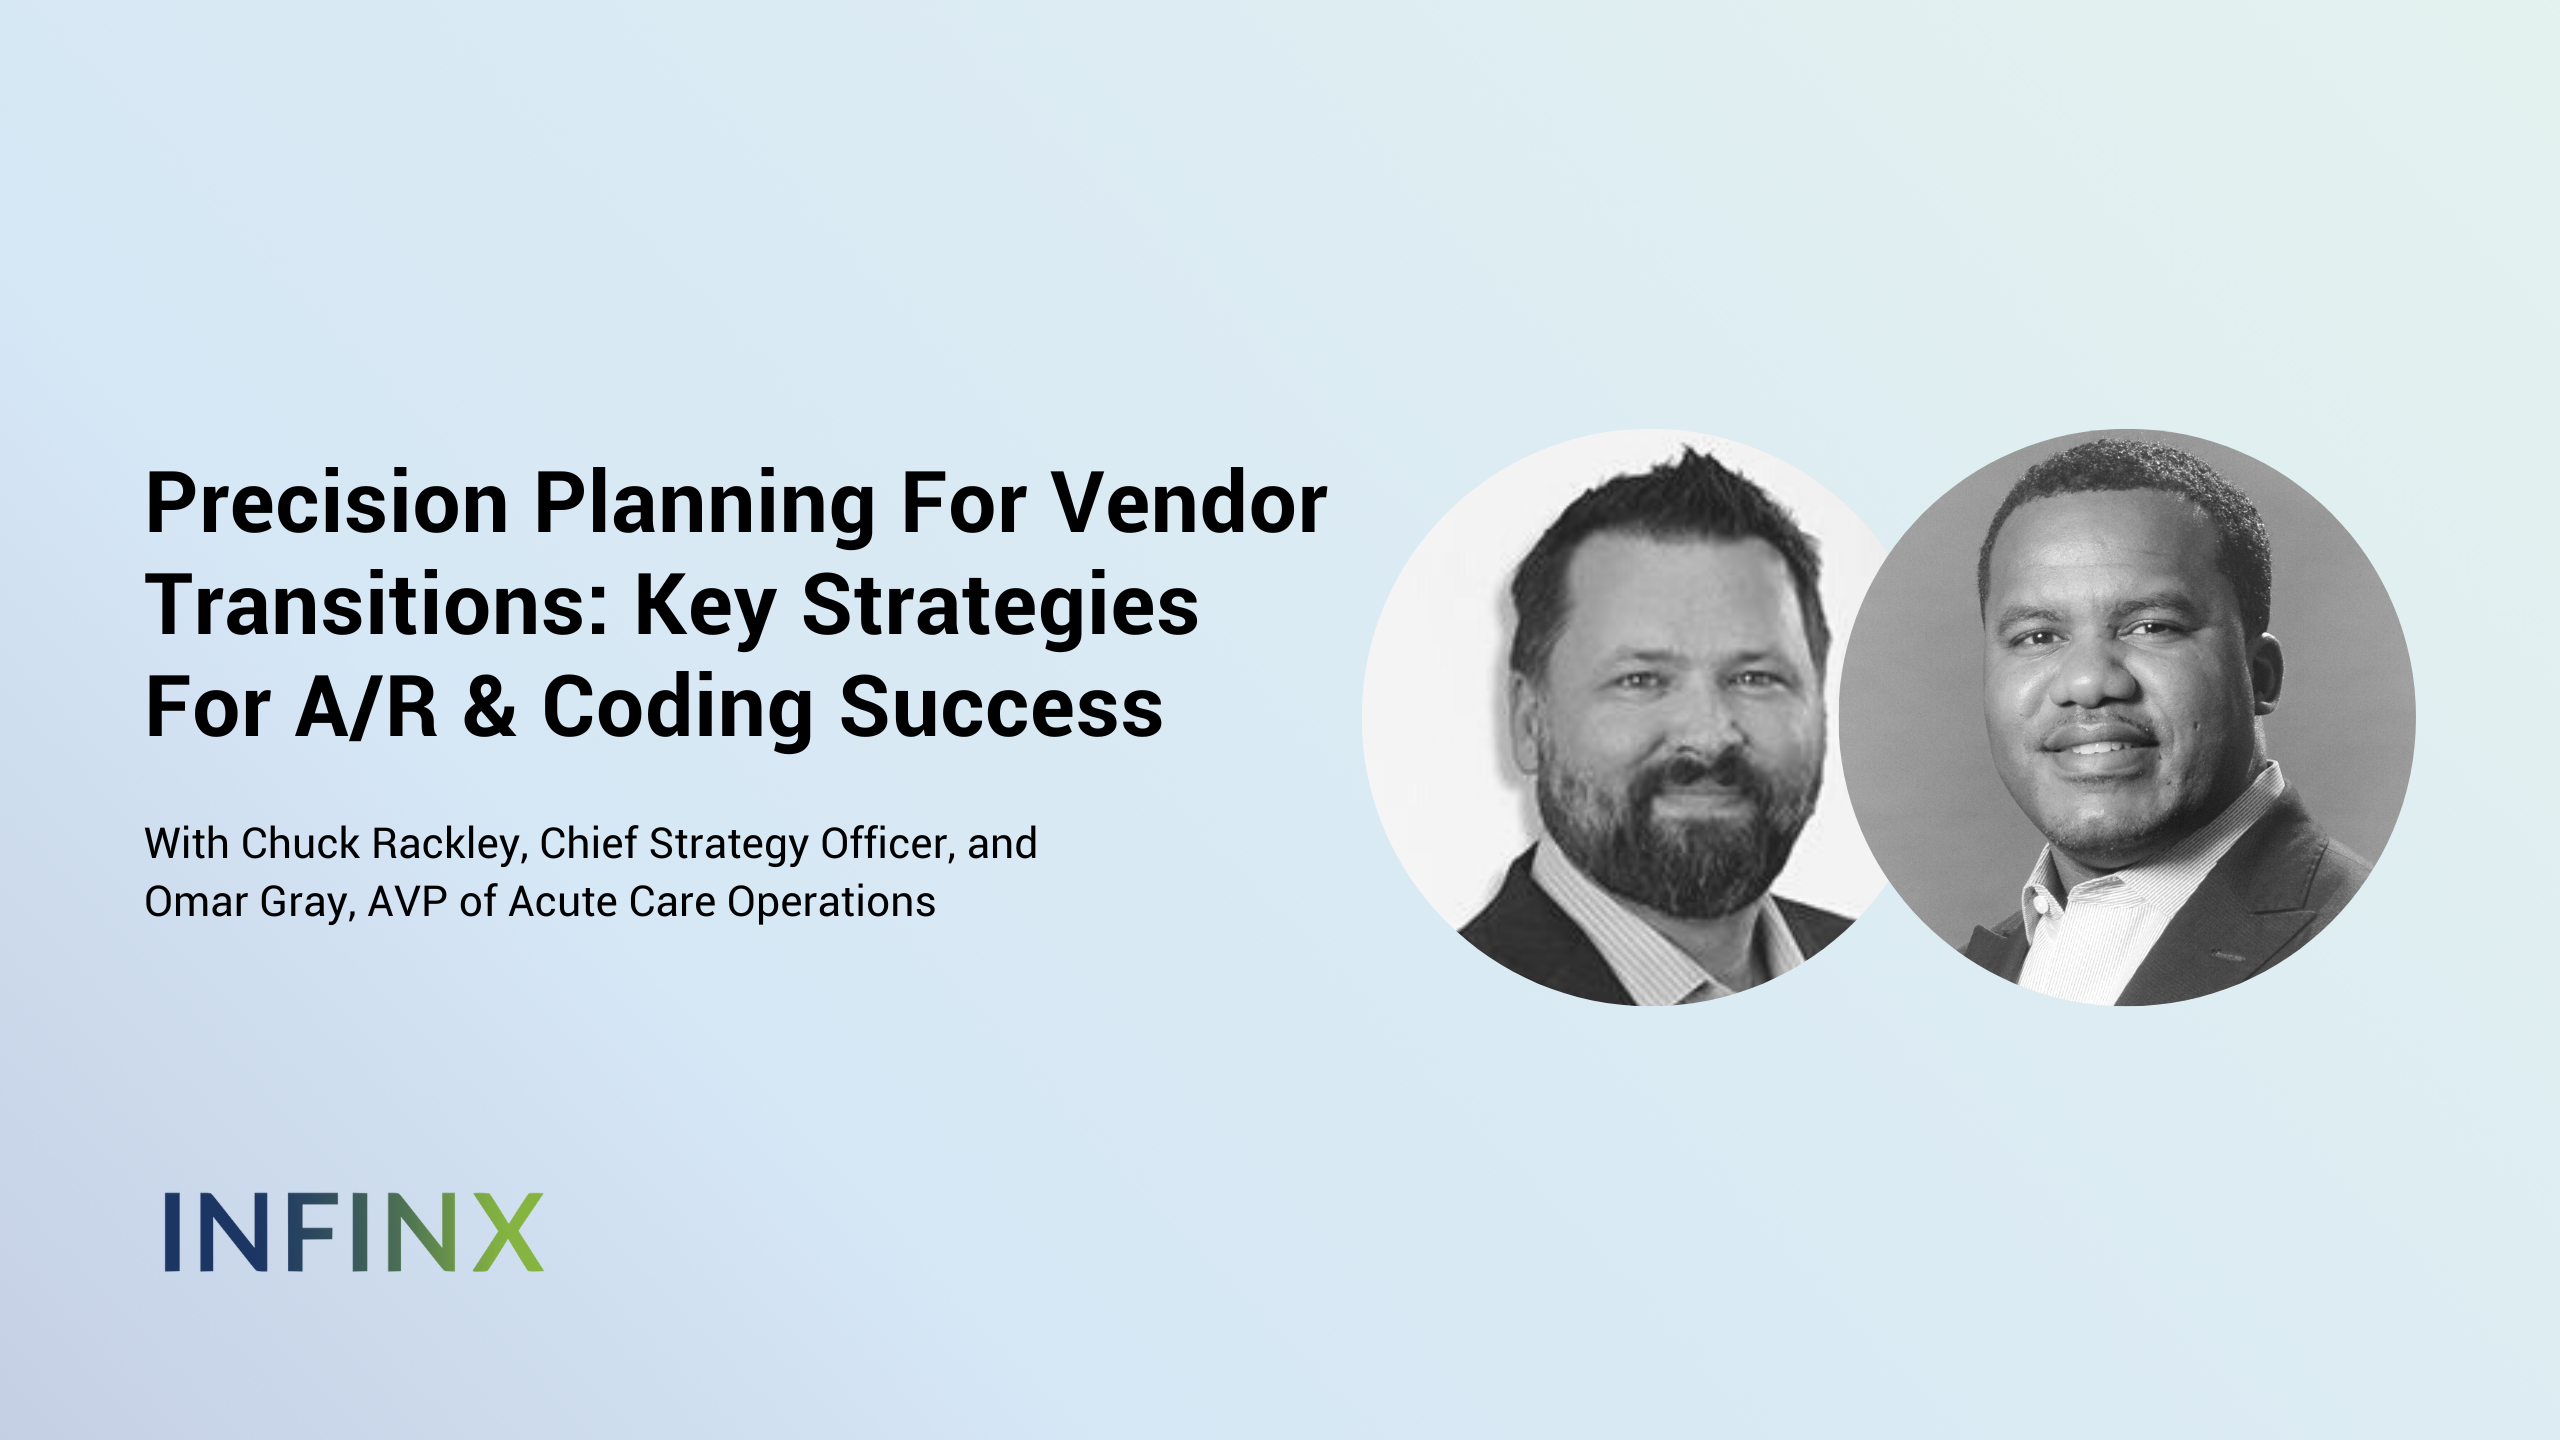 Precision Planning For Vendor Transitions Key Strategies For A/R & Coding Success With Infinx Chief Strategy Officer Chuck Rackley And AVP of Acute Care Operations Omar Gray Infinx Office Hours Revenue Cycle Optimized Webinar